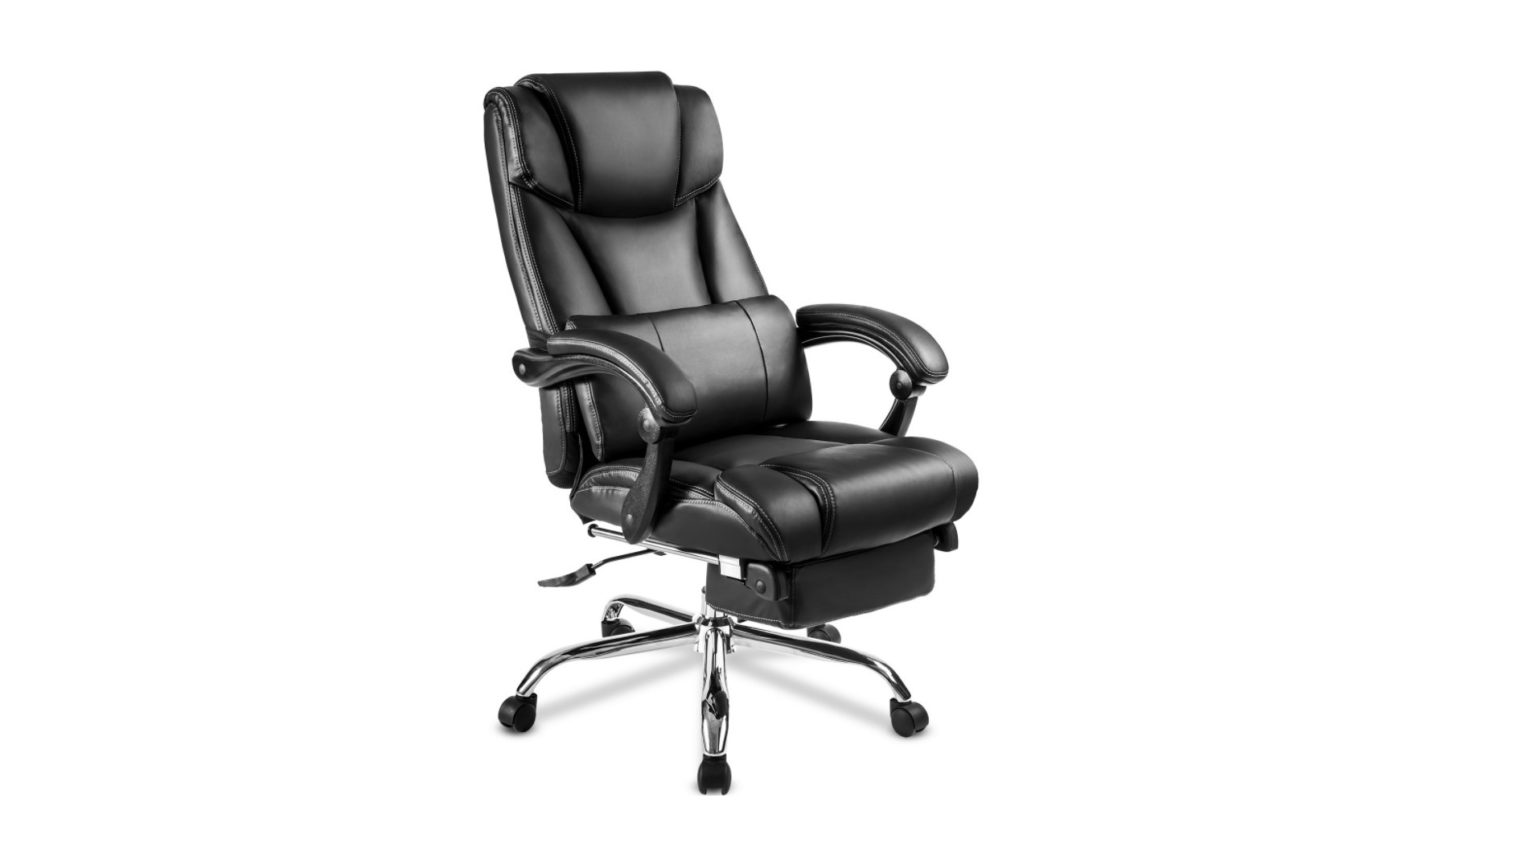 Best reclining office chair with footrest - 2022 reviews